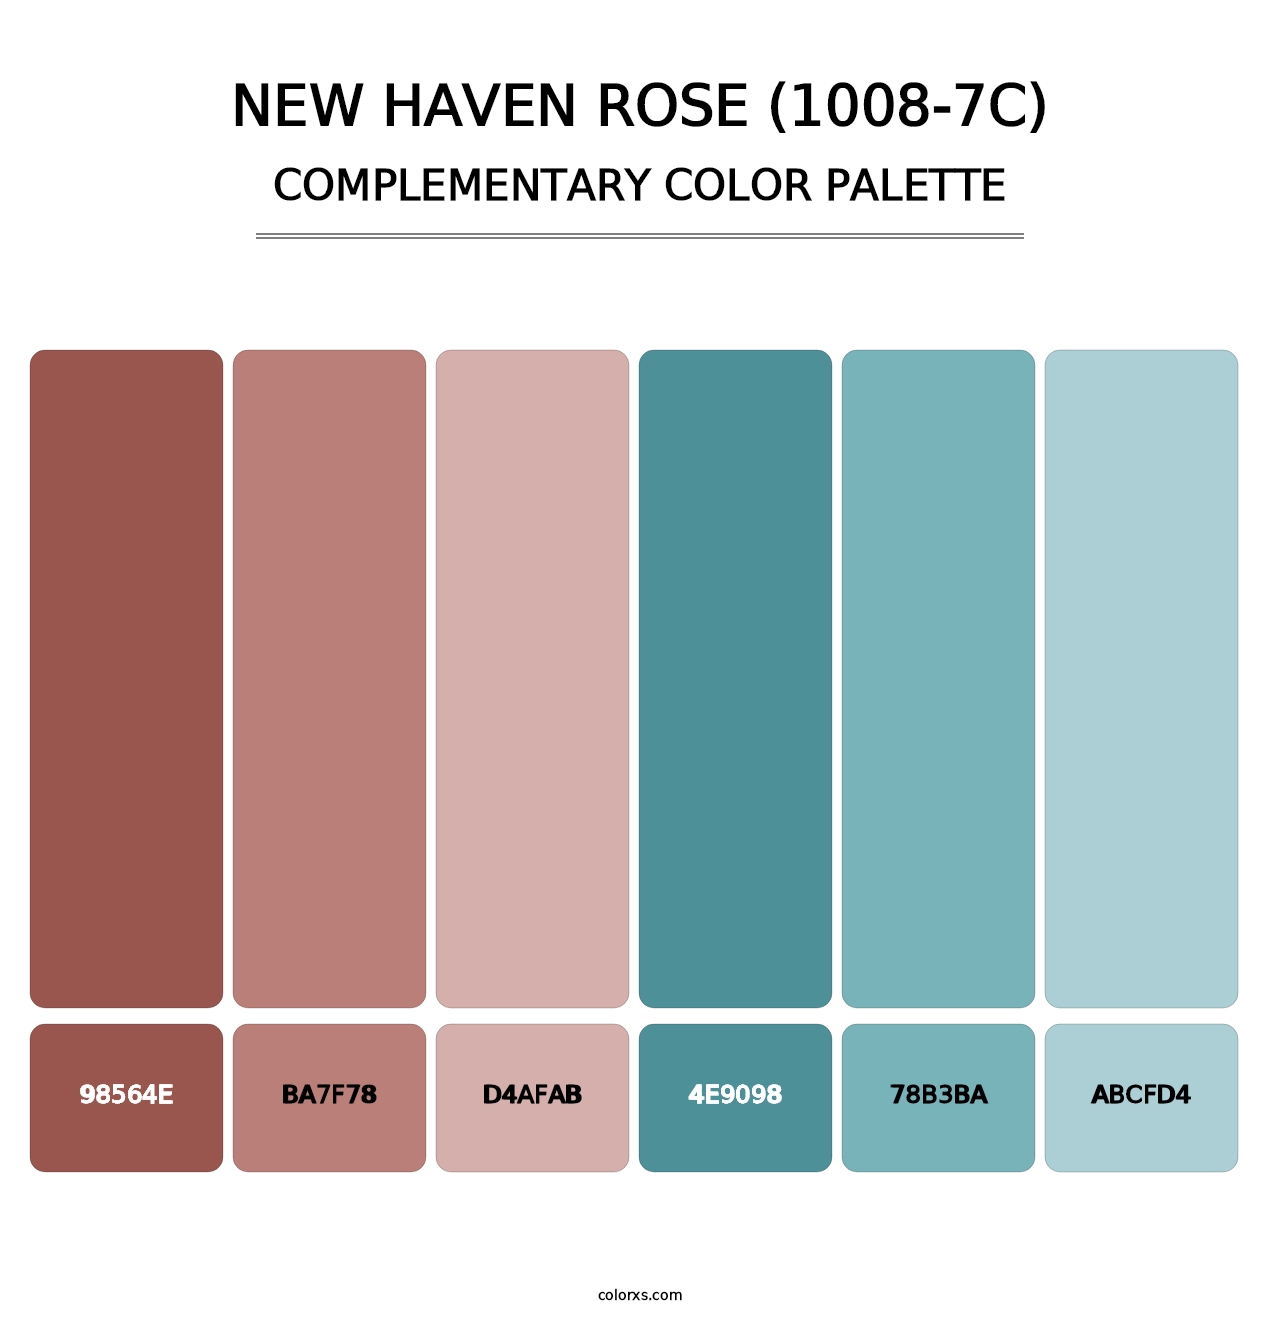 New Haven Rose (1008-7C) - Complementary Color Palette